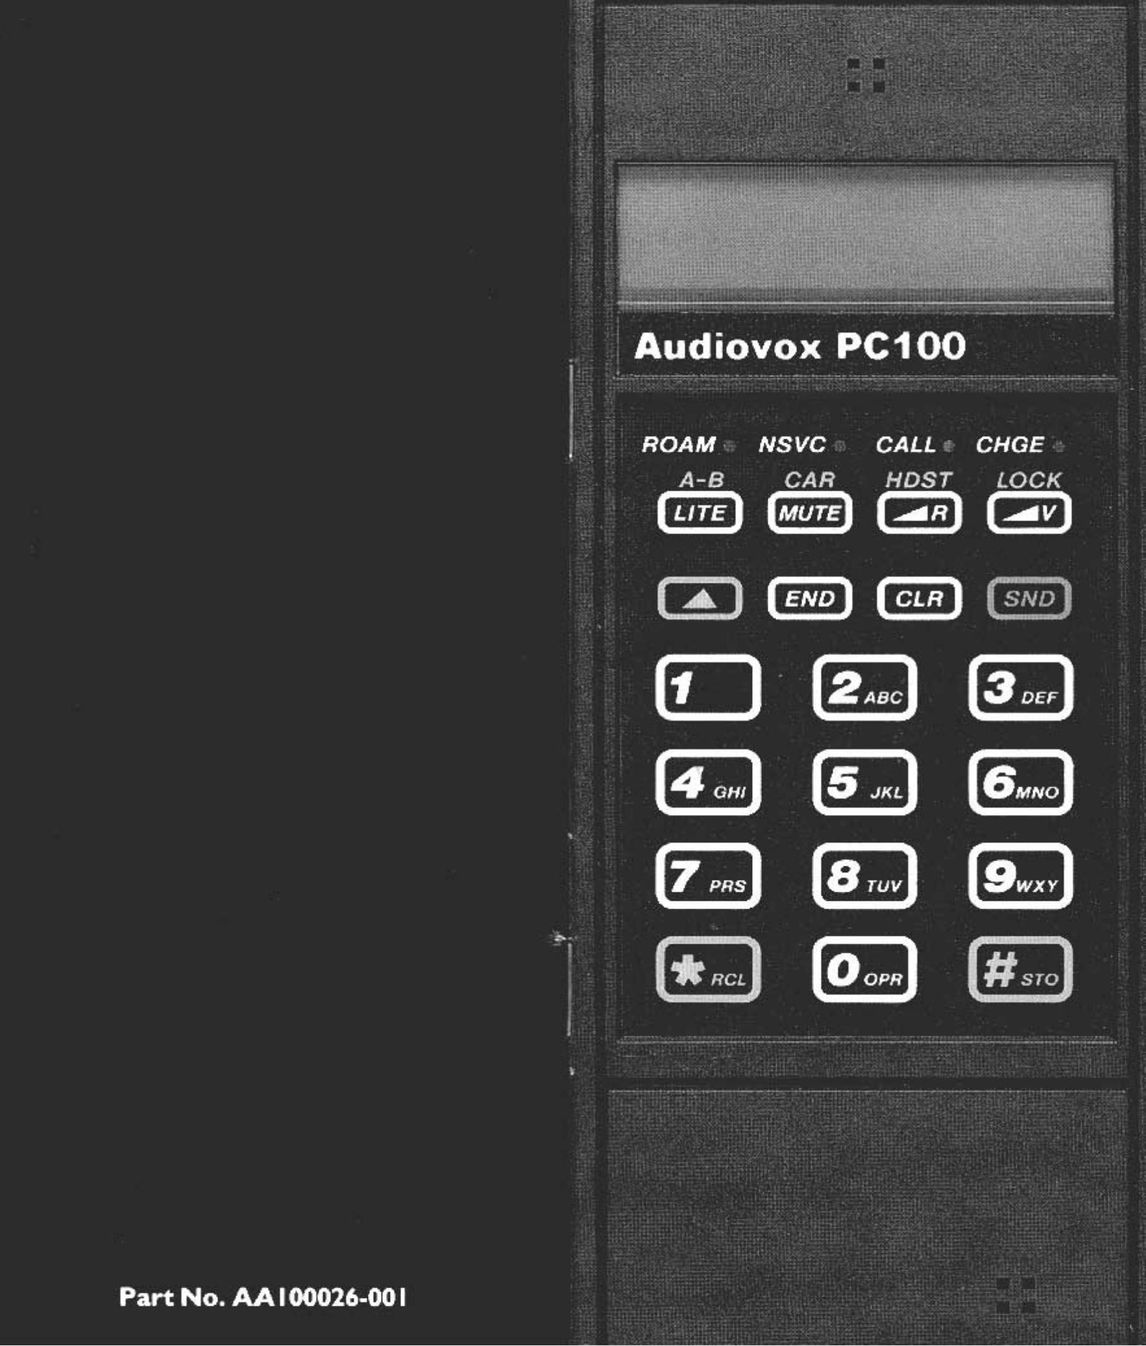 Audiovox PC100 Cell Phone User Manual